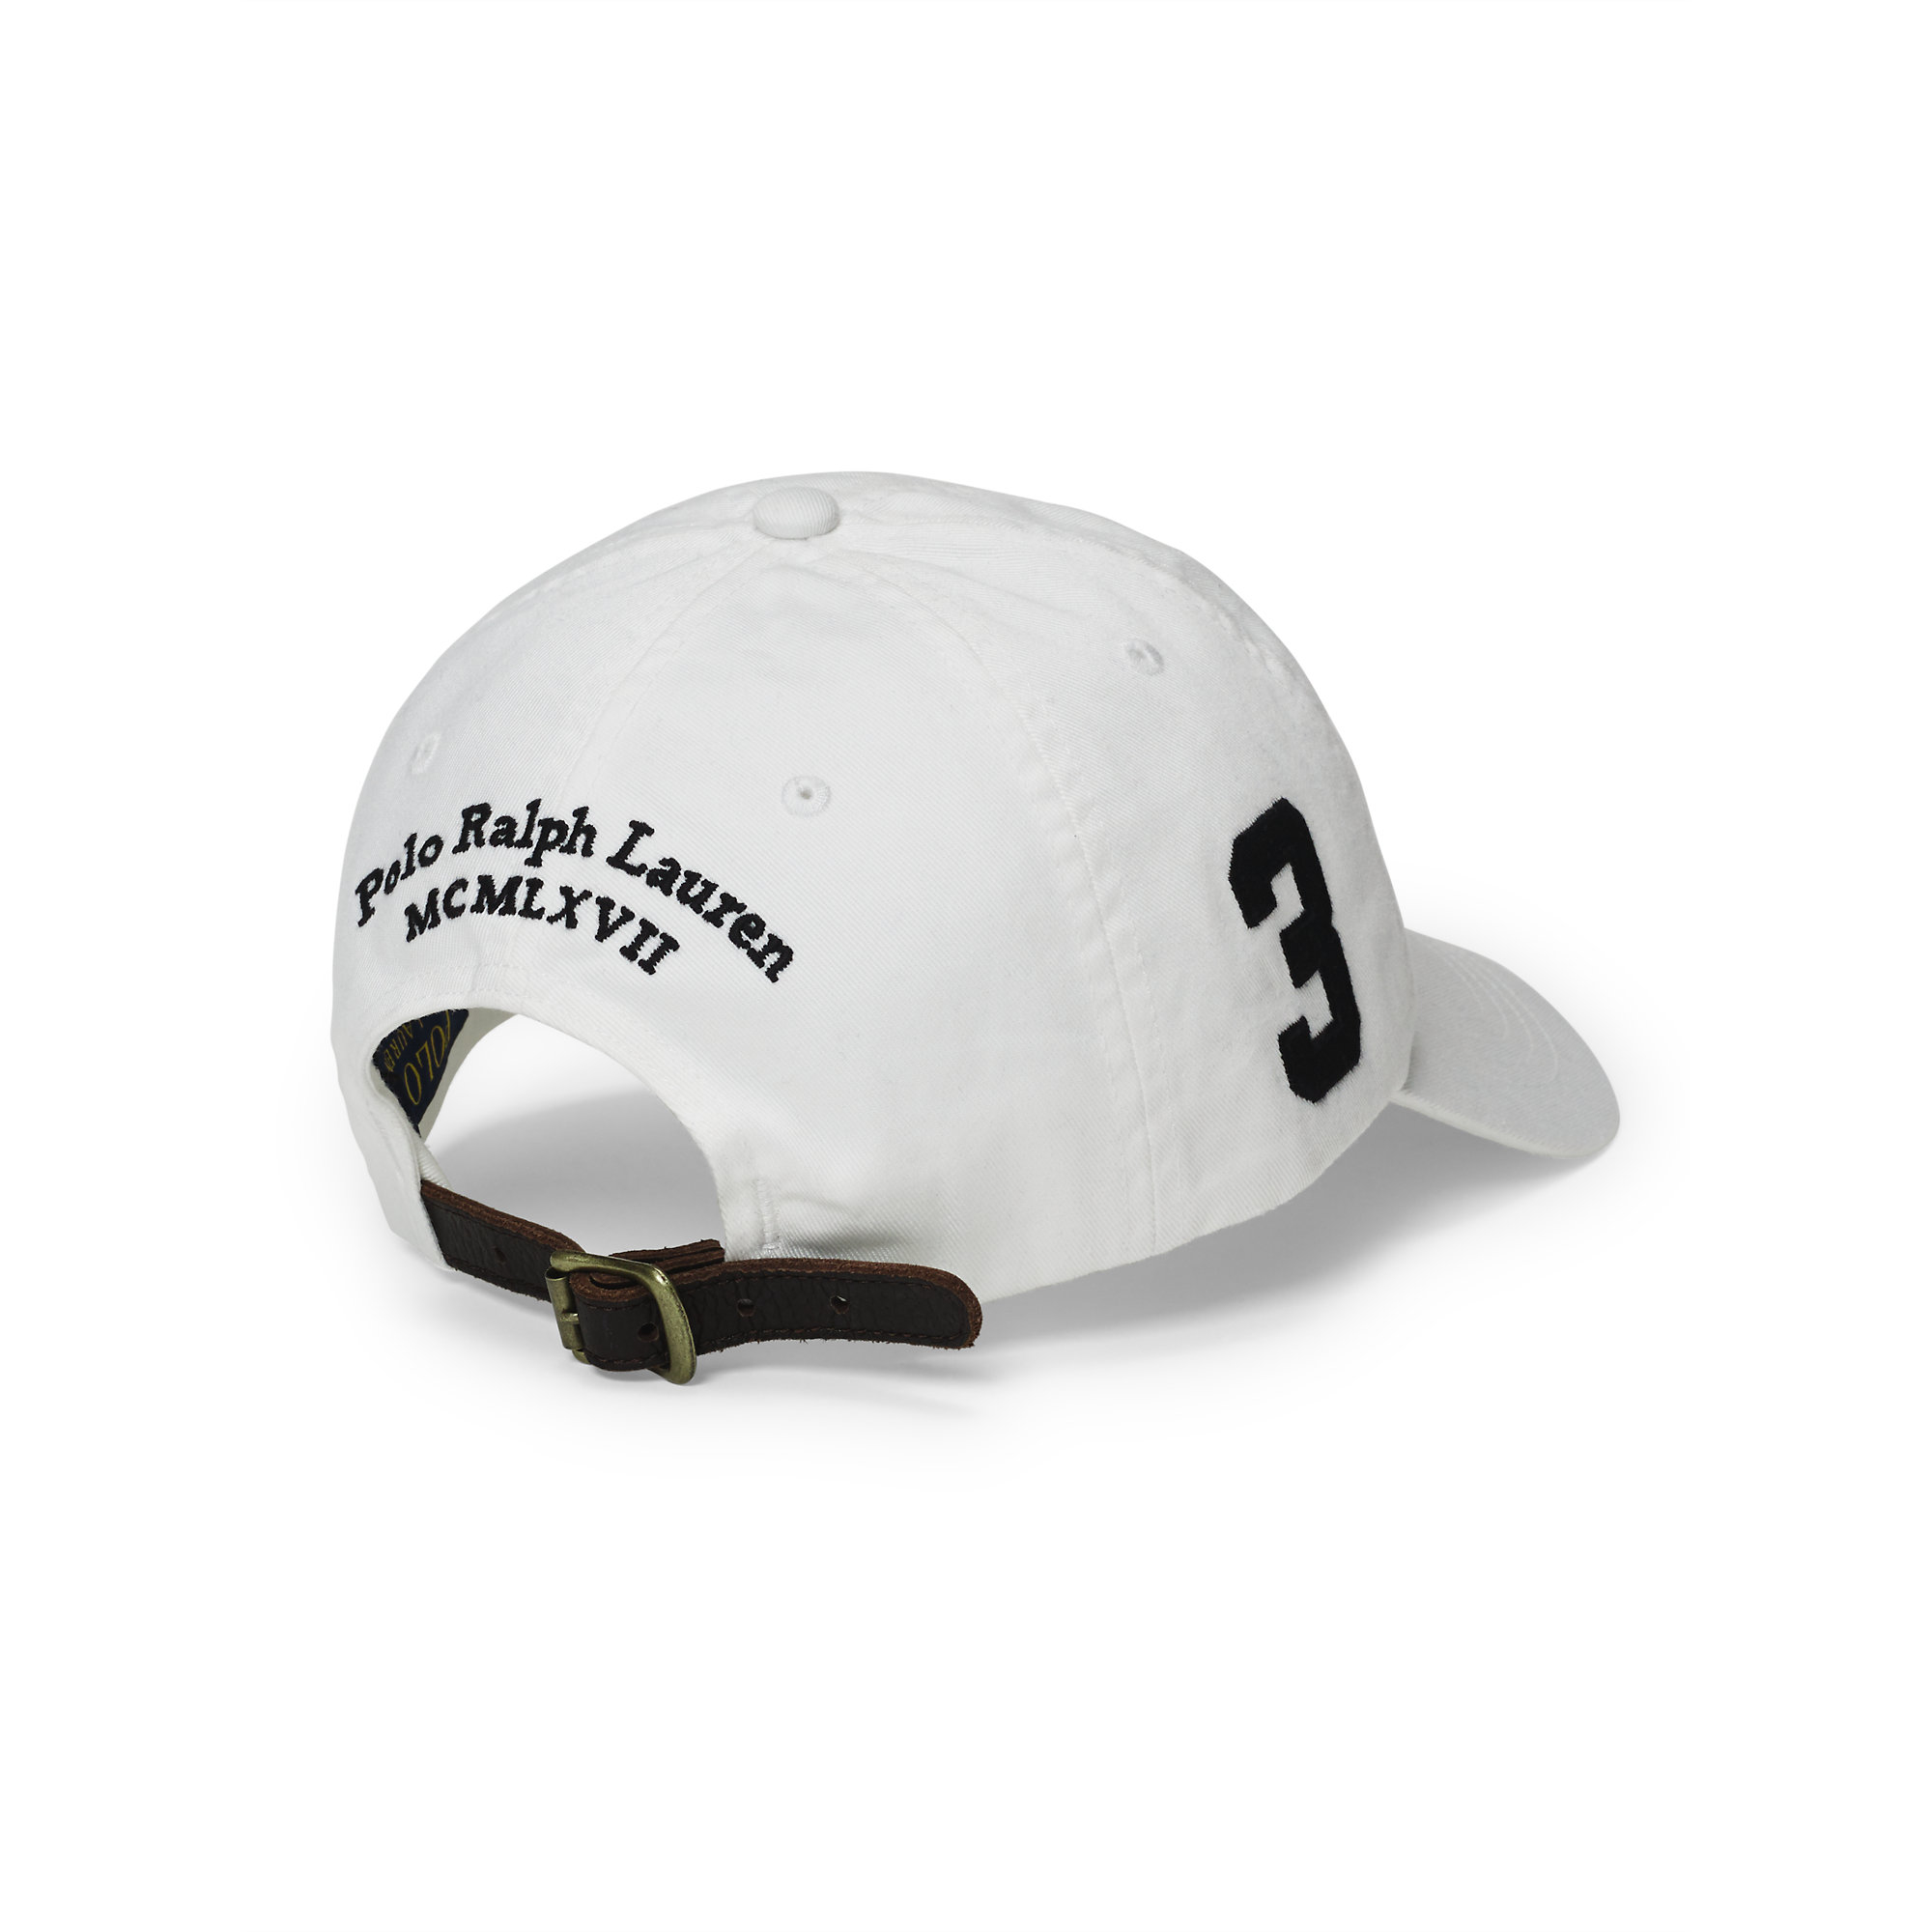 white polo hat with leather strap